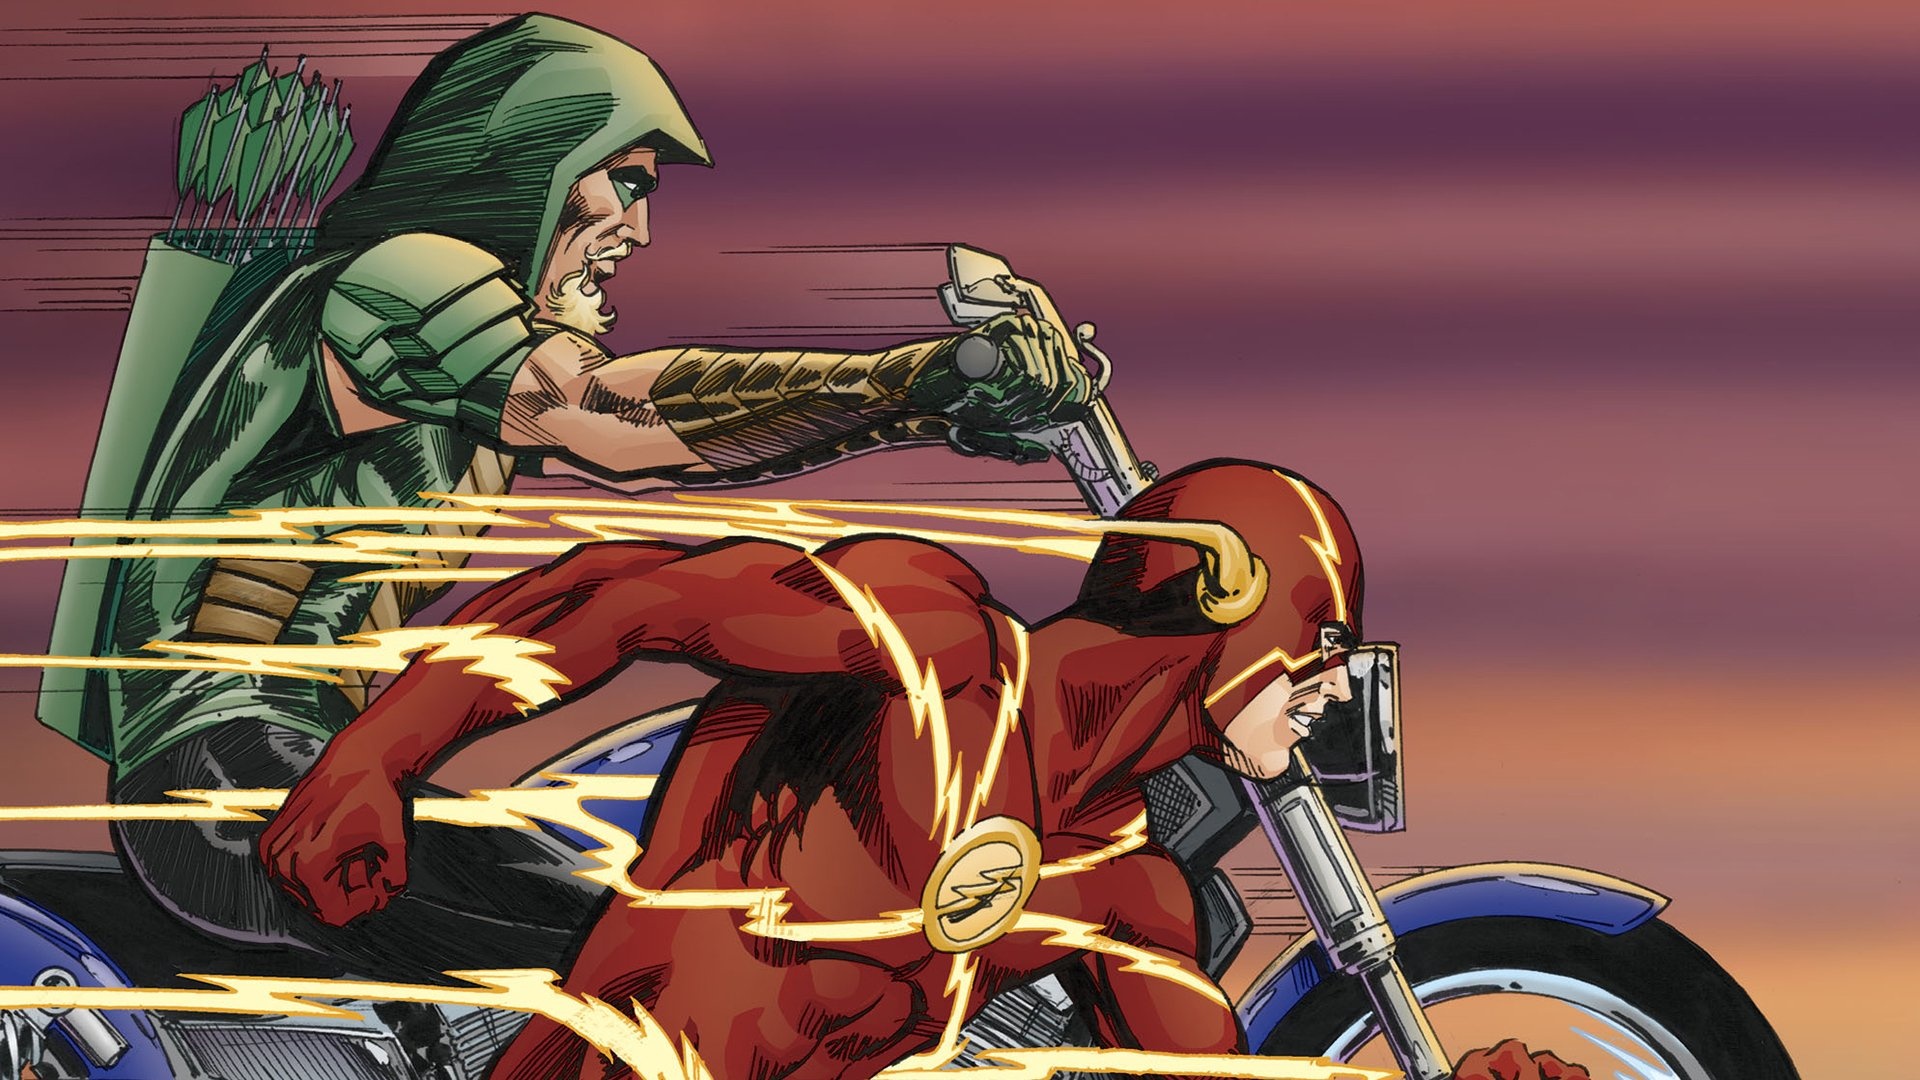 Green Arrow and Flash: Costumed superheroes crime-fighters, Barry Allen, Oliver Queen. 1920x1080 Full HD Wallpaper.